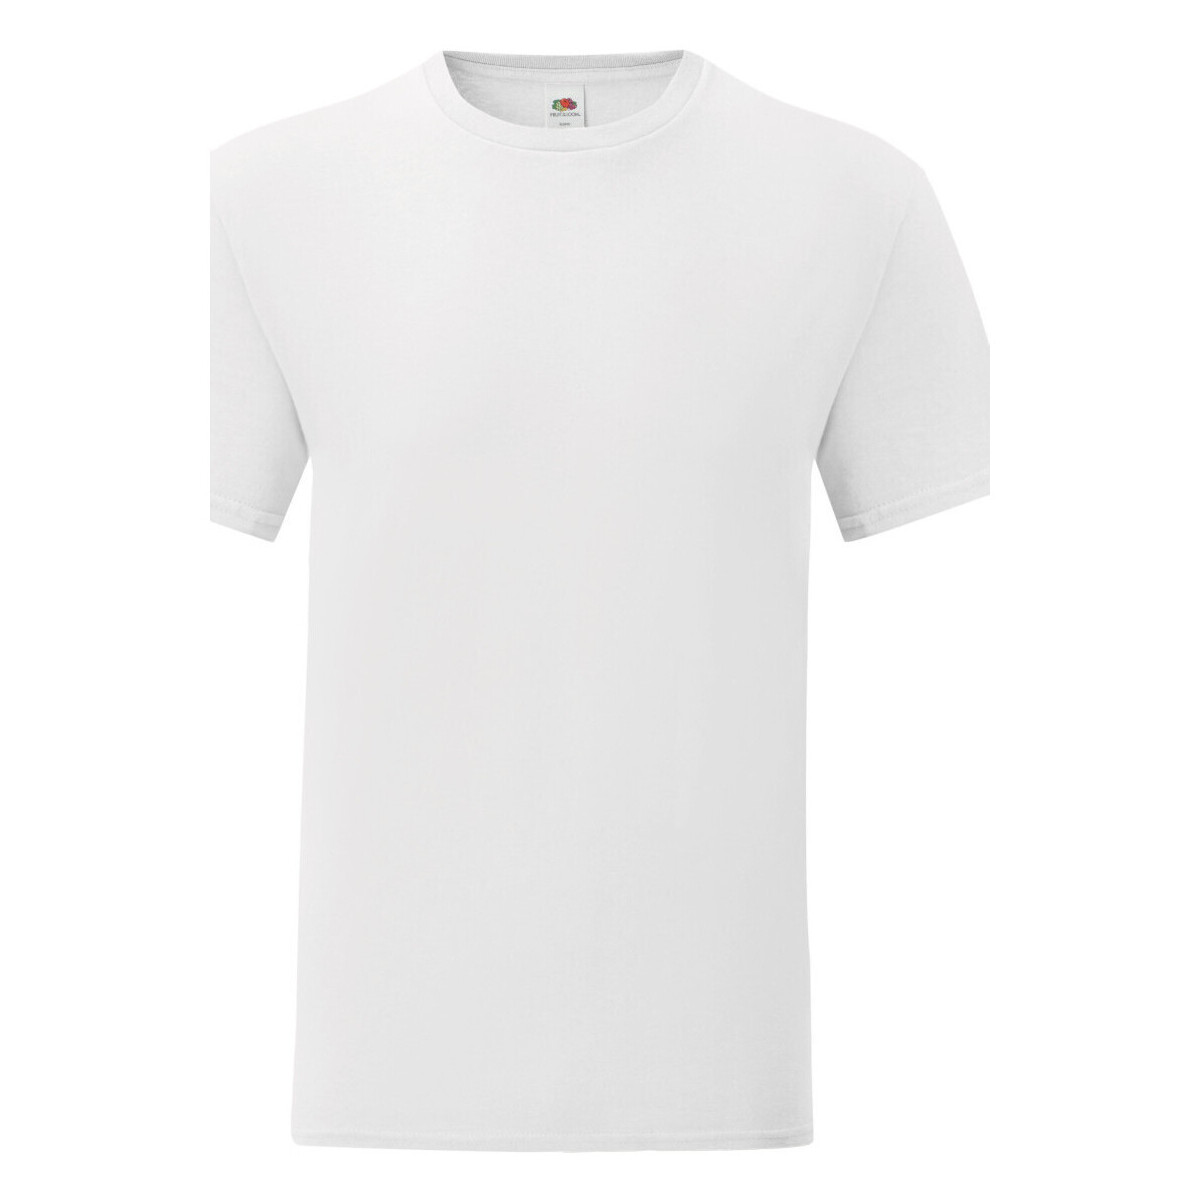 Vêtements Homme T-shirts manches longues Fruit Of The Loom Iconic 150 Blanc